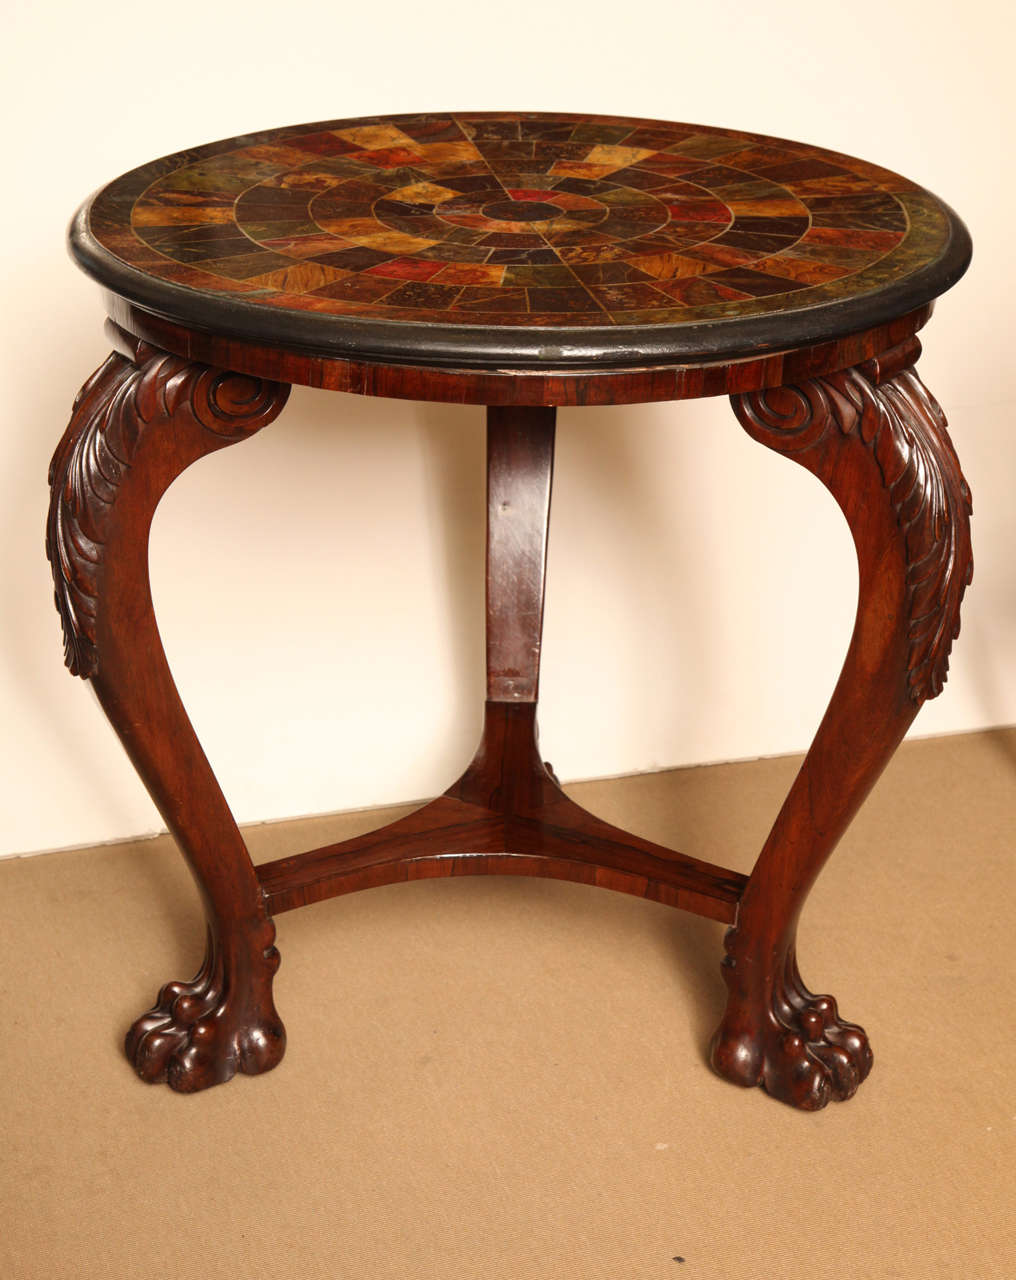 Early 19th Century English Regency Table with Faux Specimen Marble Top In Good Condition For Sale In New York, NY